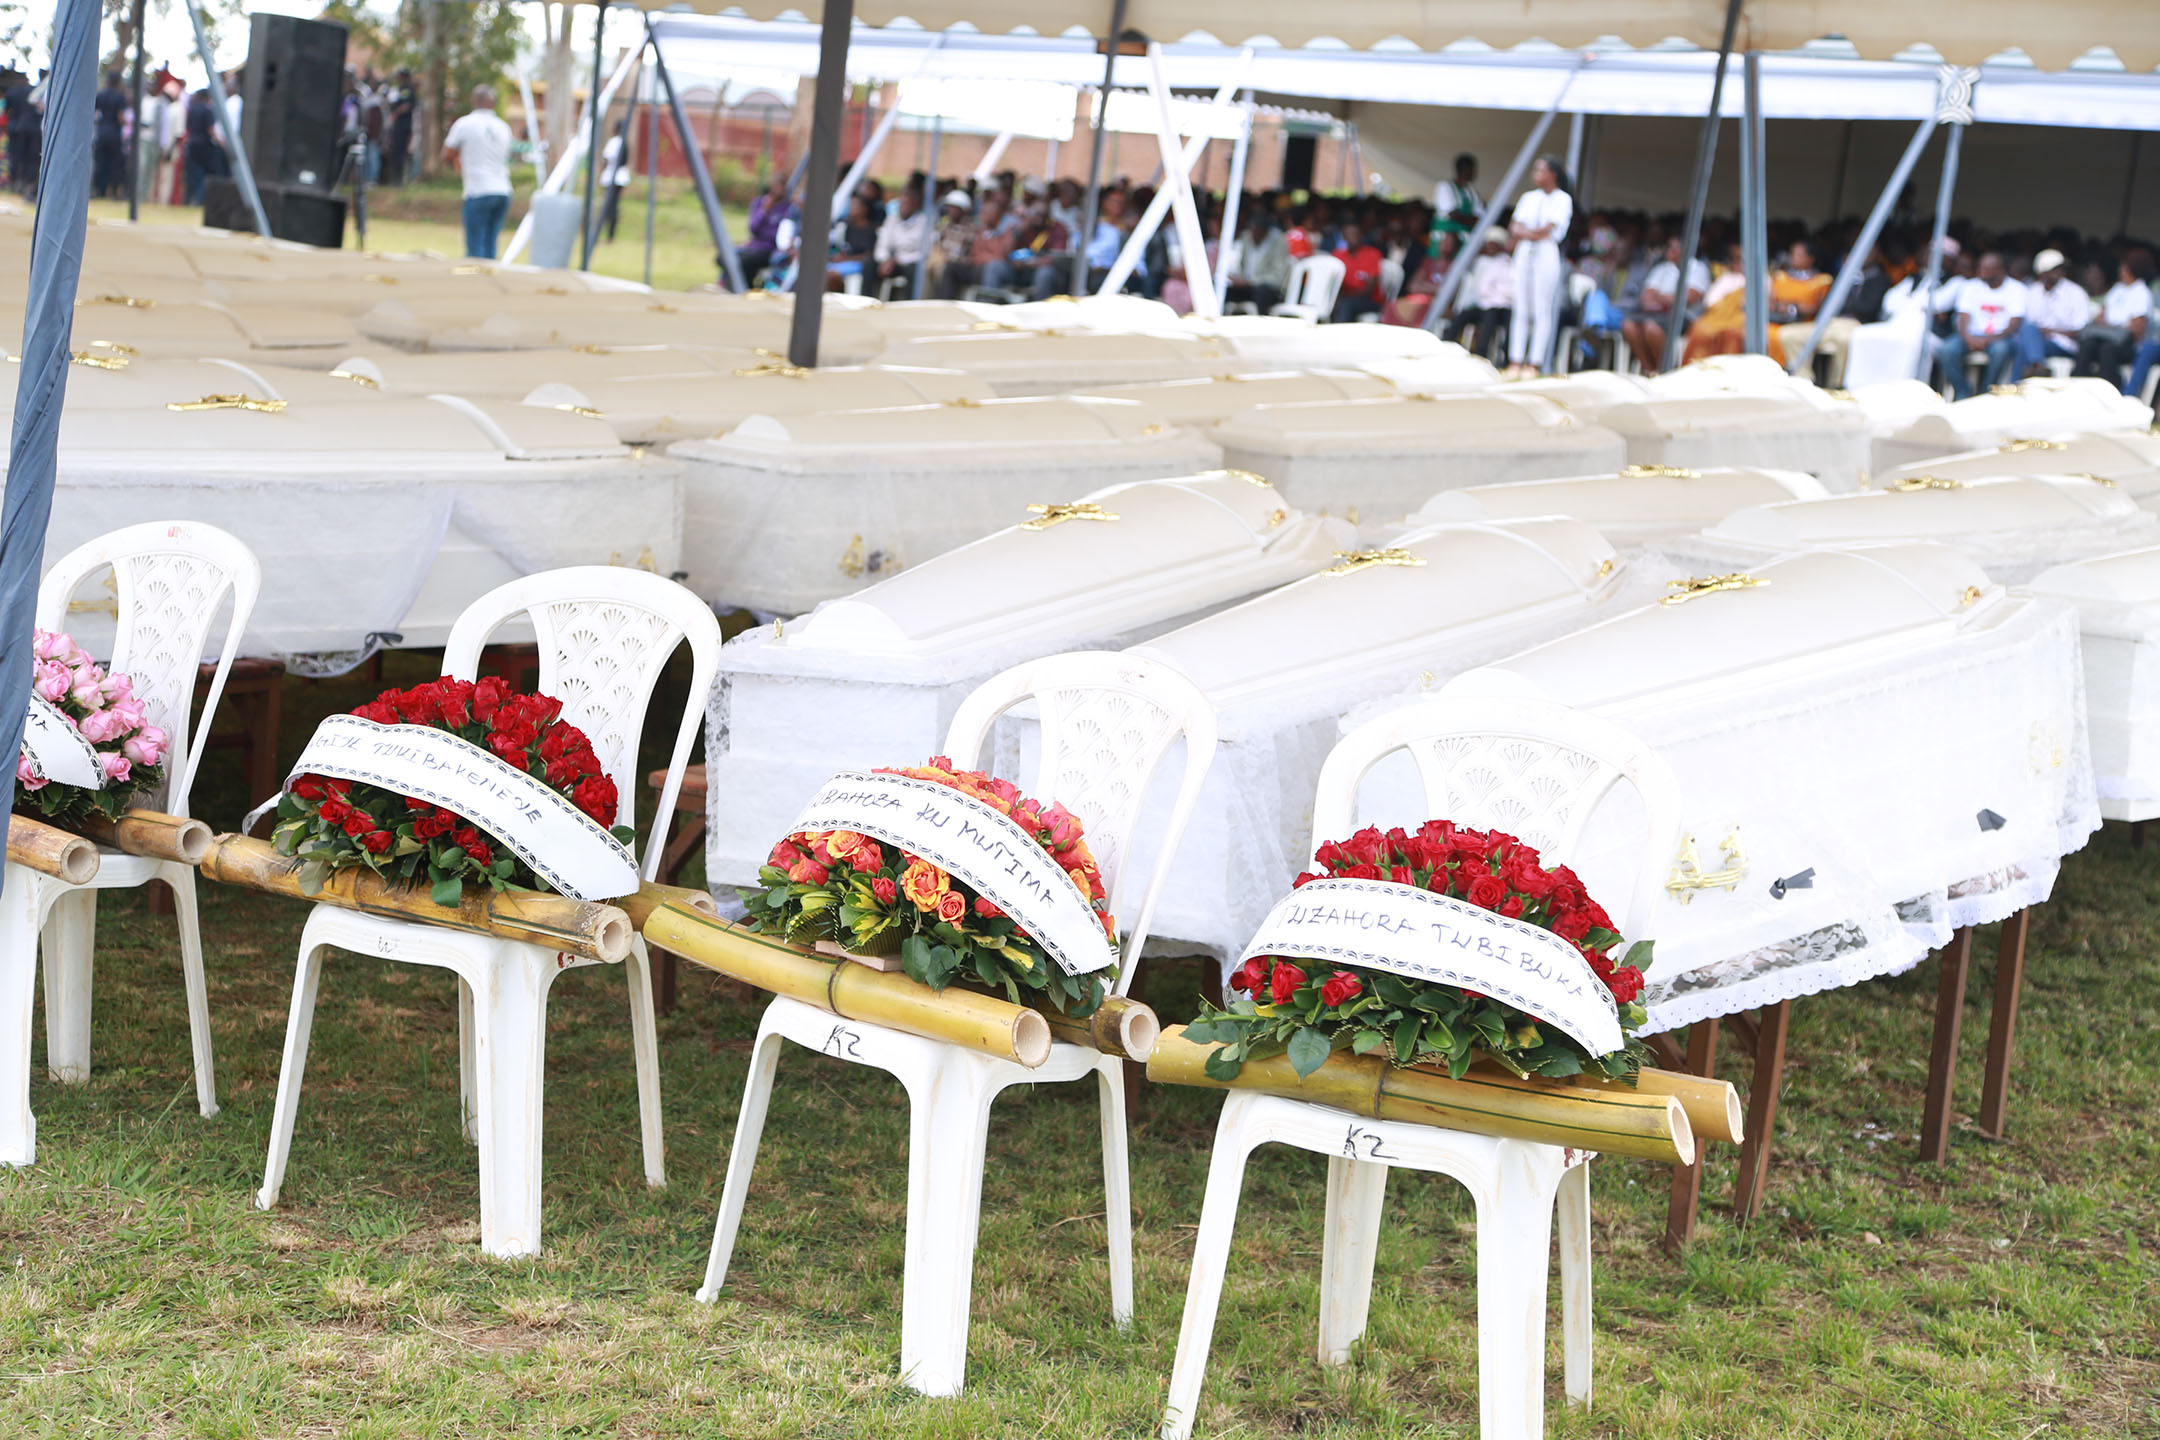 A decent burial event for victims of the 1994 Genocide against the Tutsi at Nyanza-Kicukiro Genocide Memorial on May 4, 2019. Photo: Sam Ngendahimana.